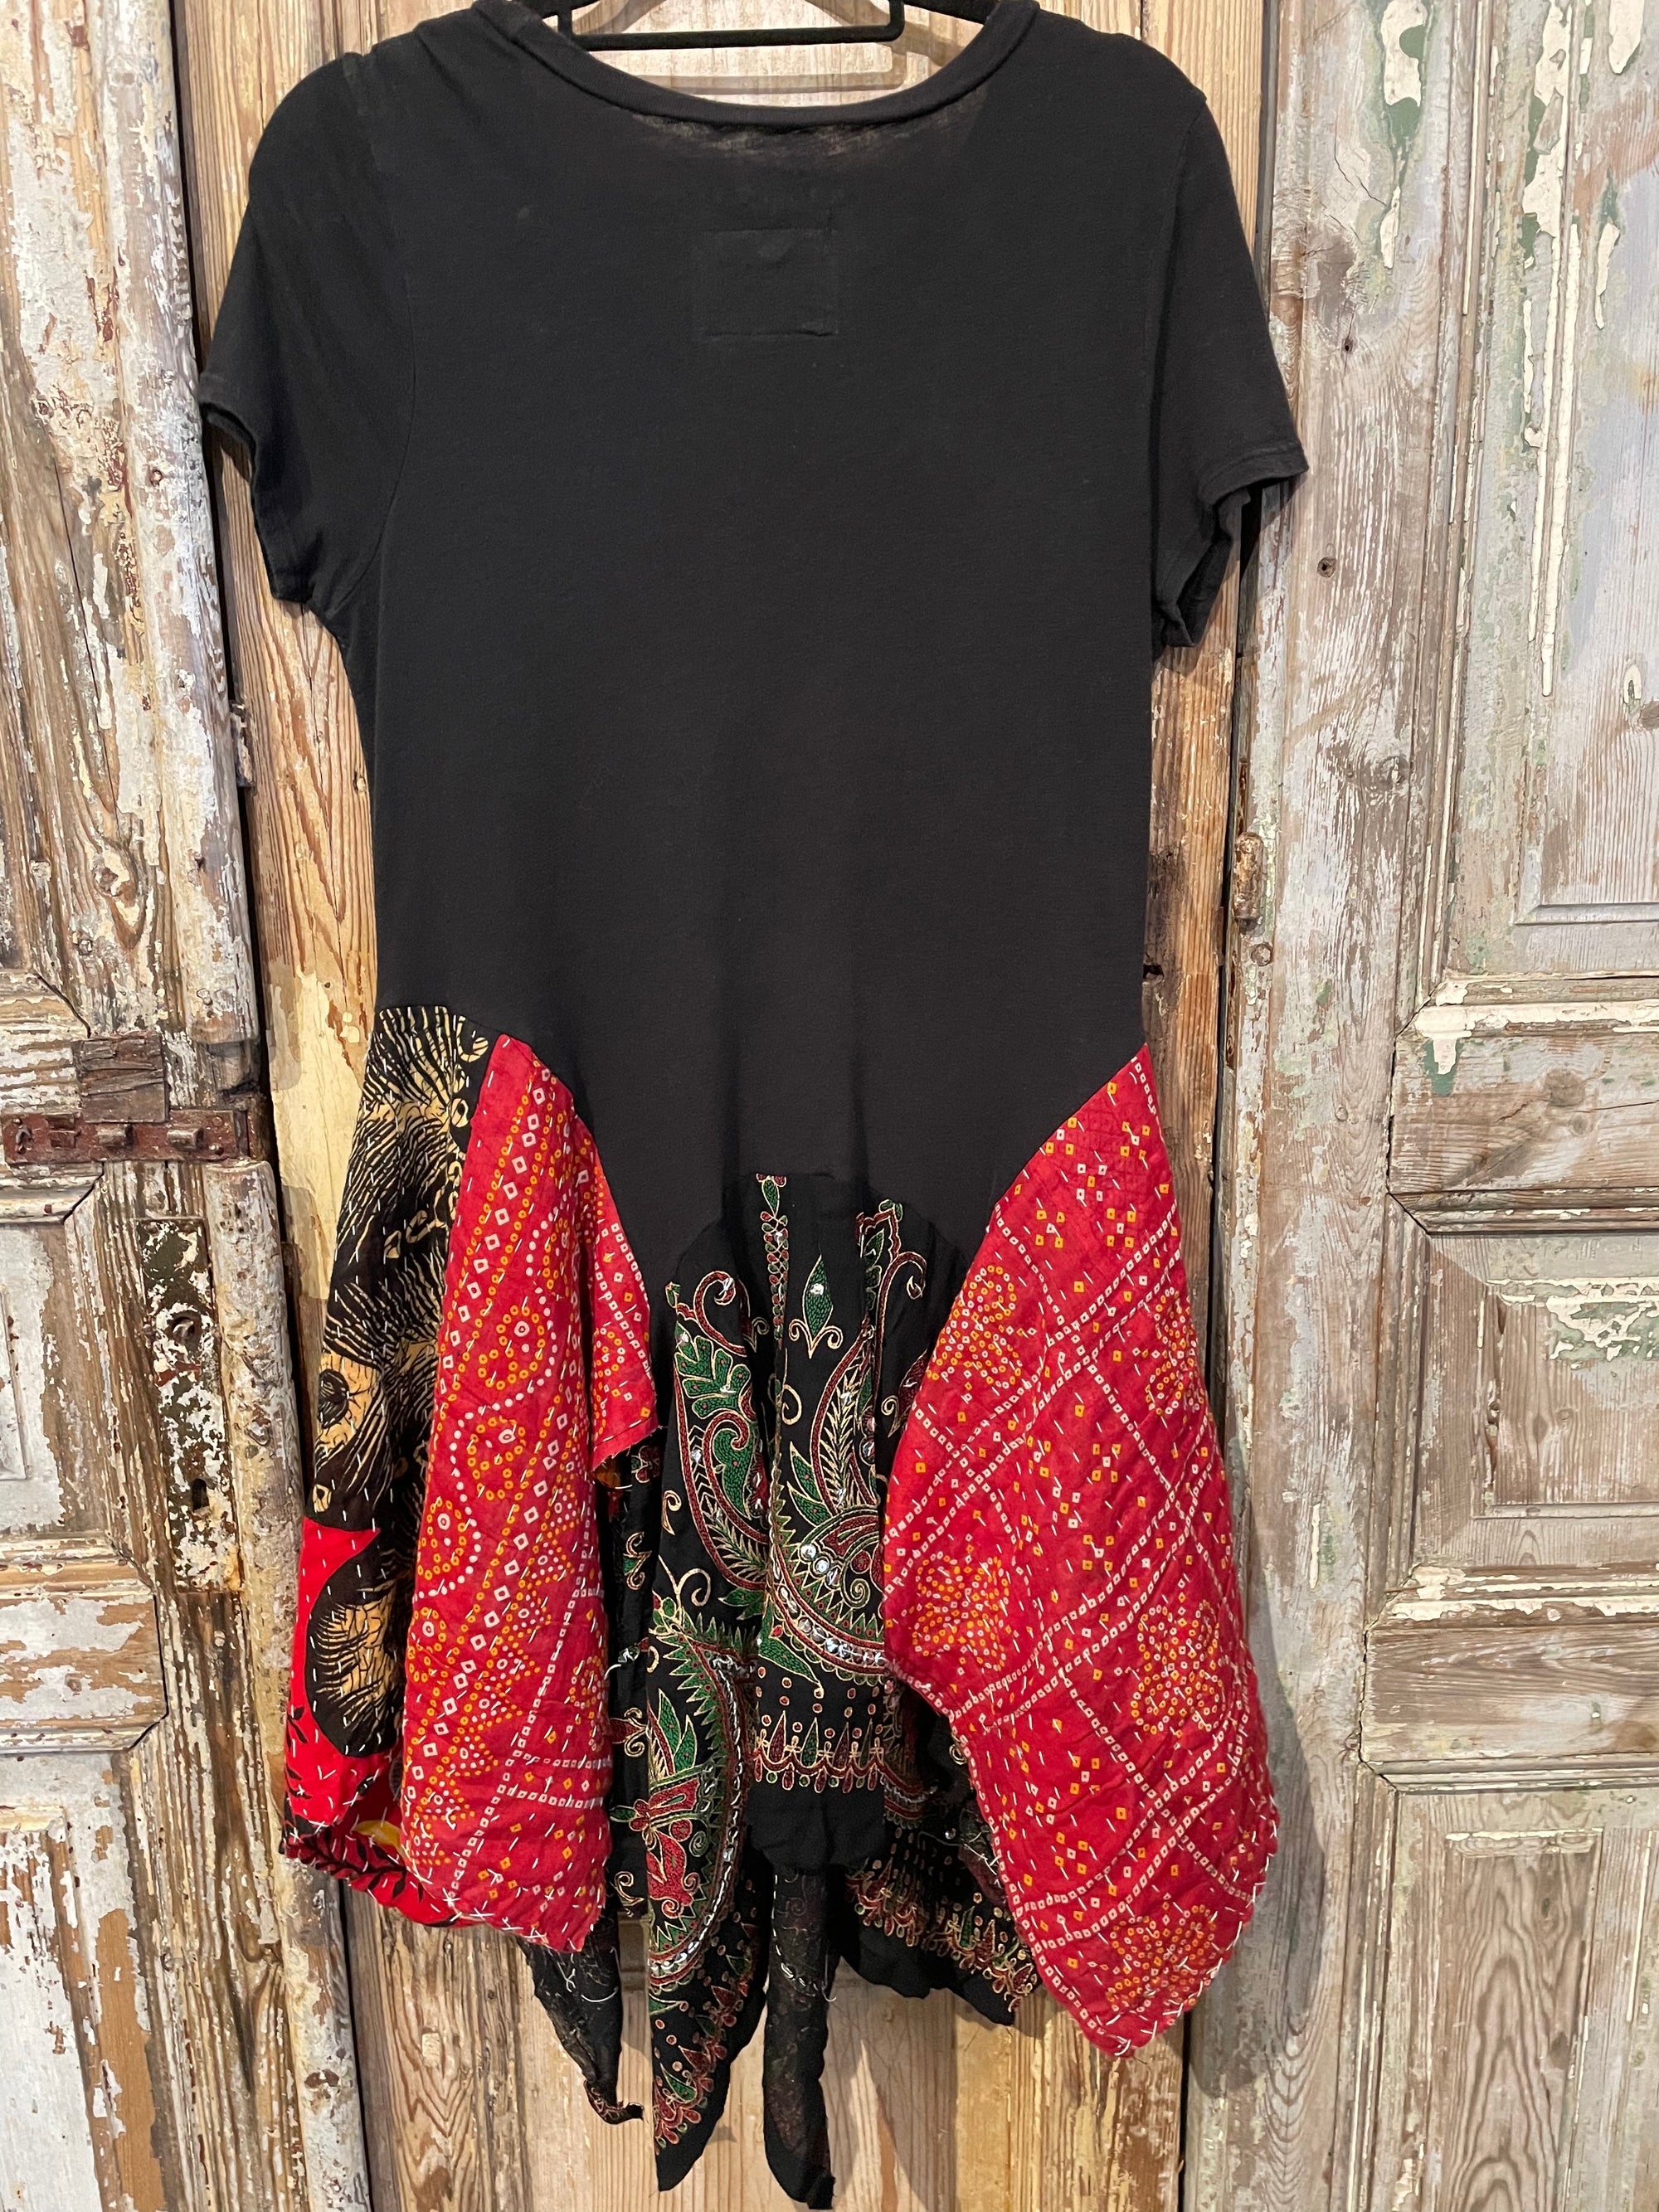 Up Cycled Rolling Stone Tee Tunic